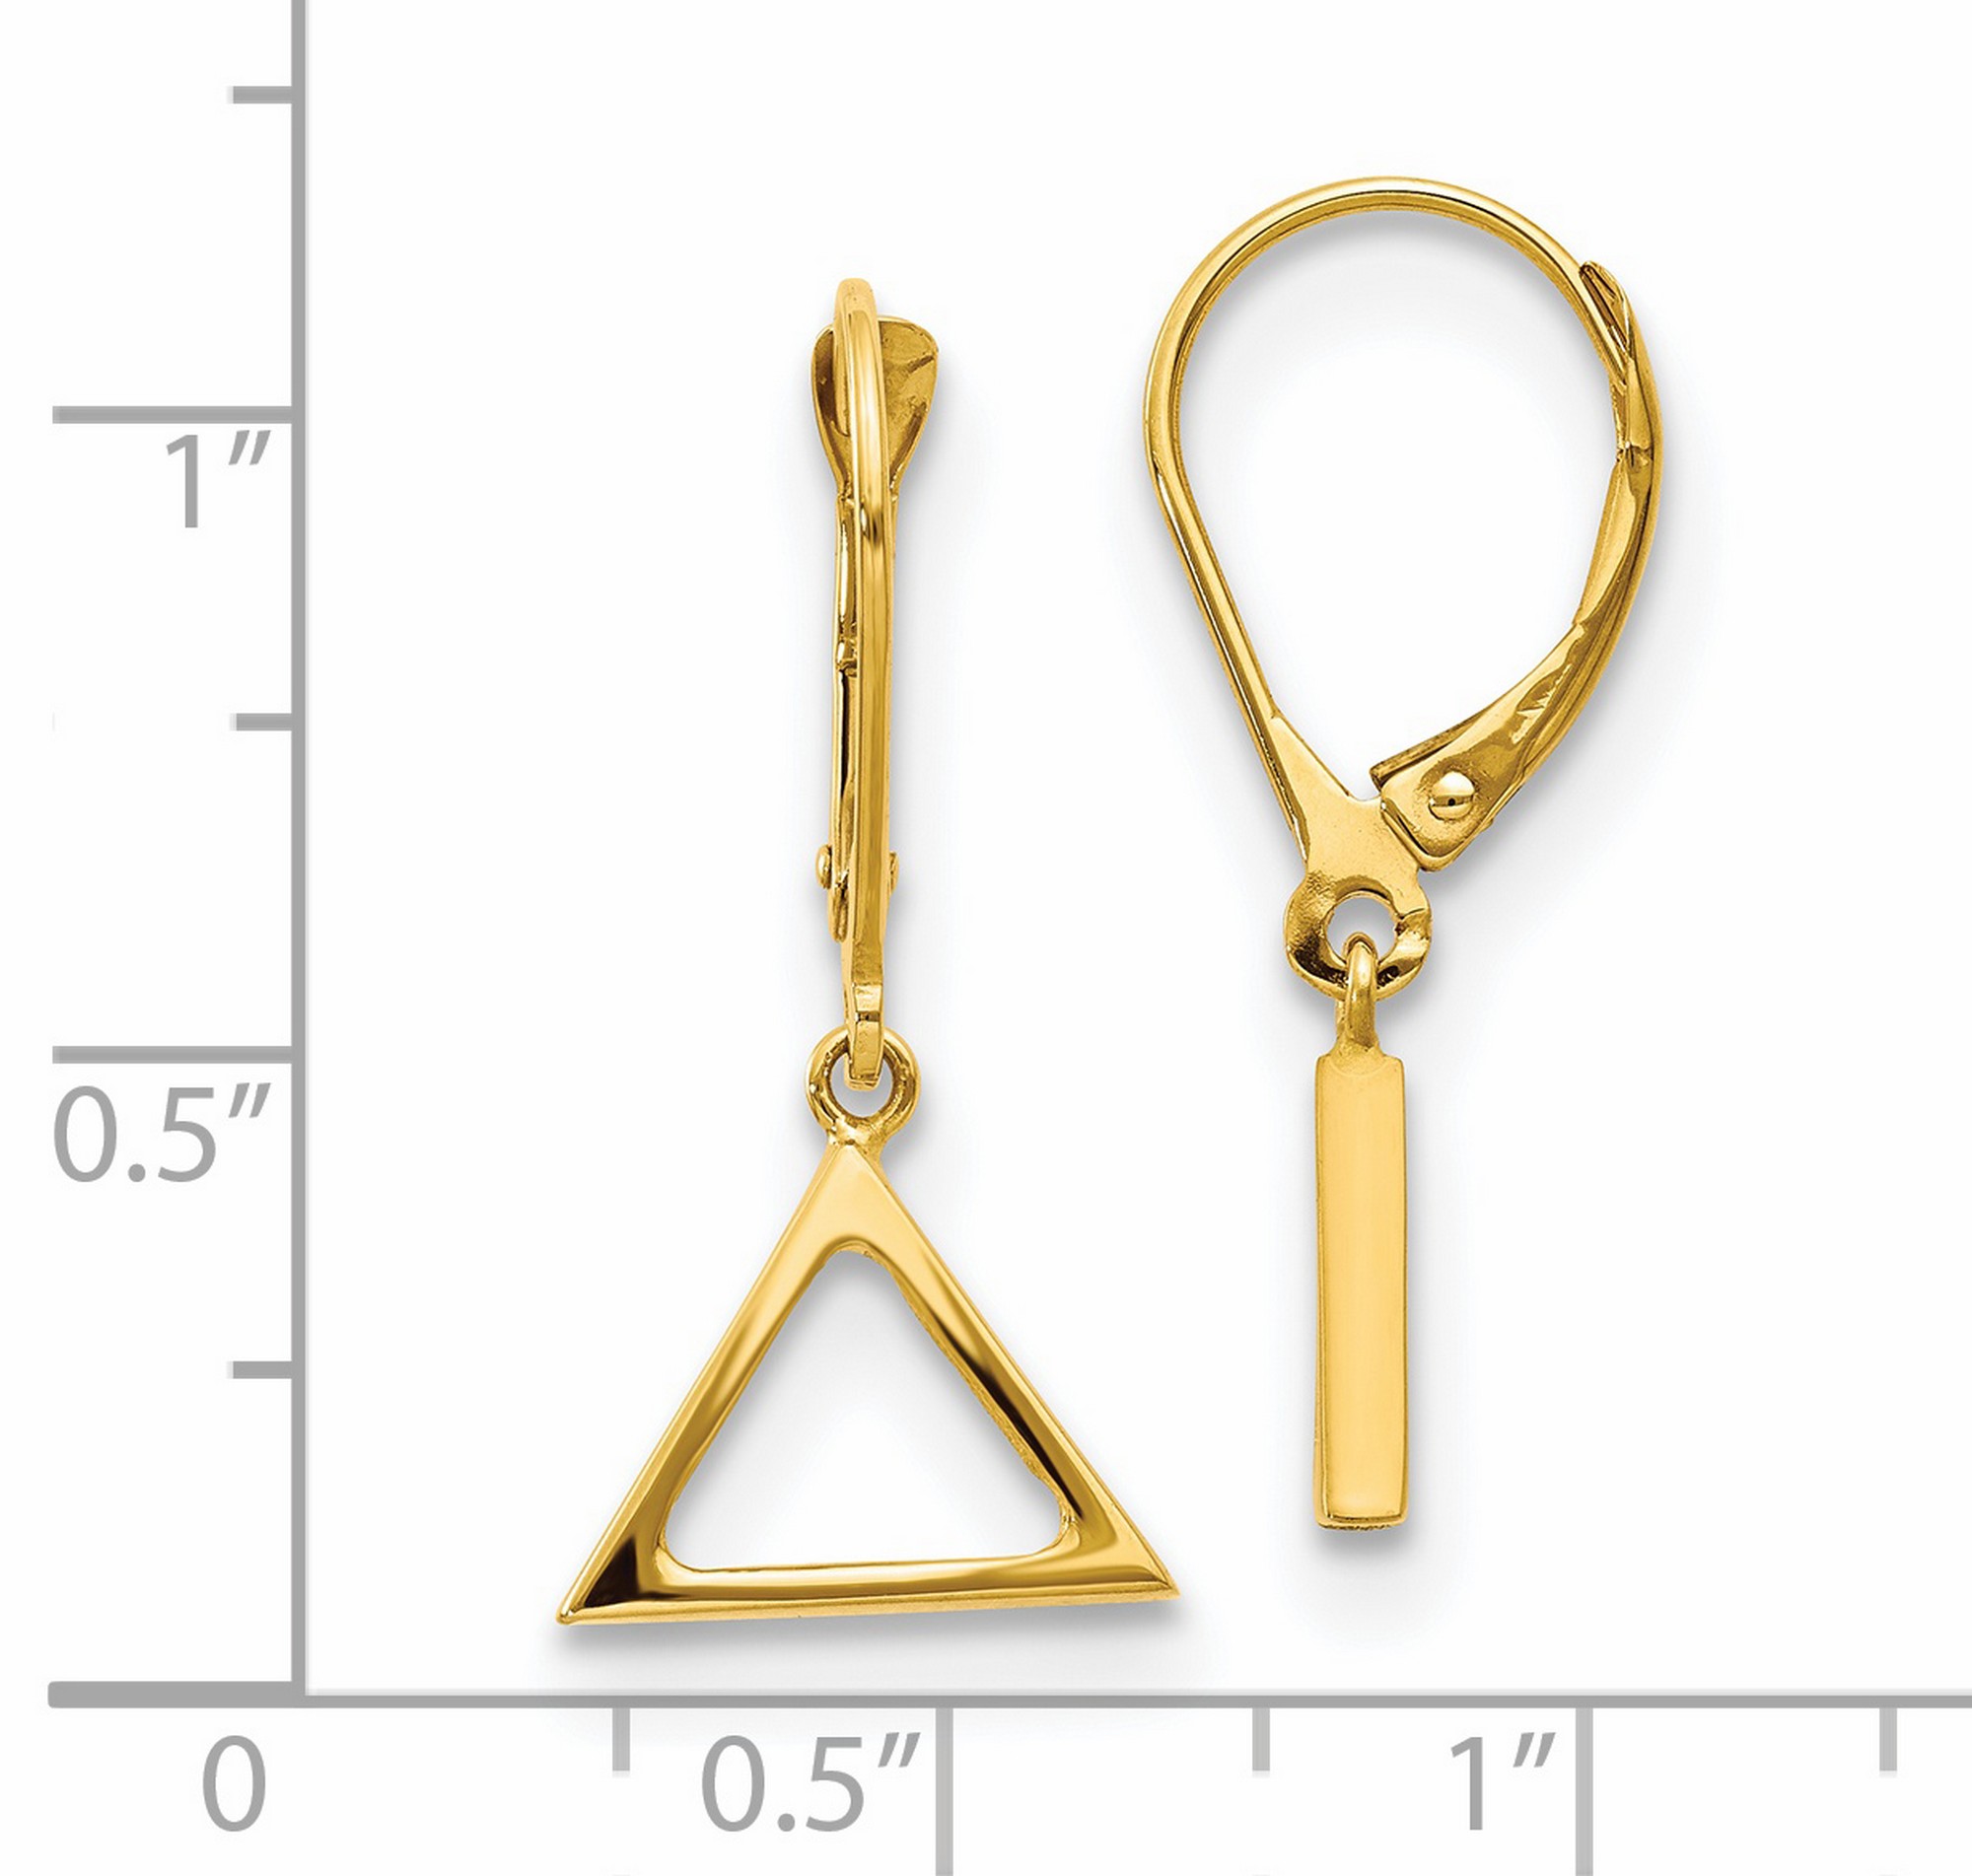 14k Yellow Gold Polished Triangle Dangle Leverback Earrings 26x12 mm - image 3 of 5